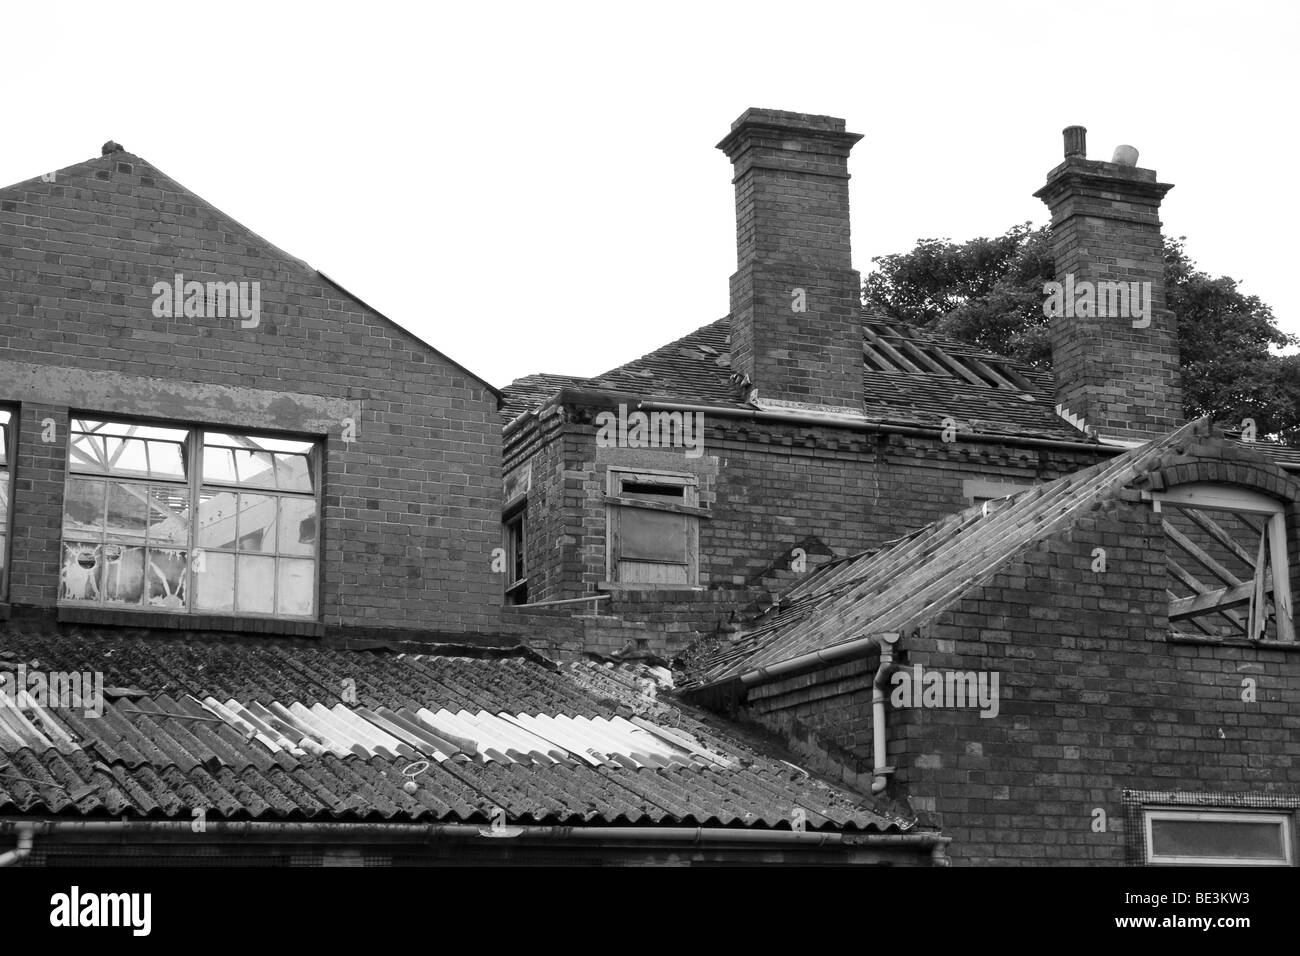 Dilapidated Buildings and Roof Stock Photo